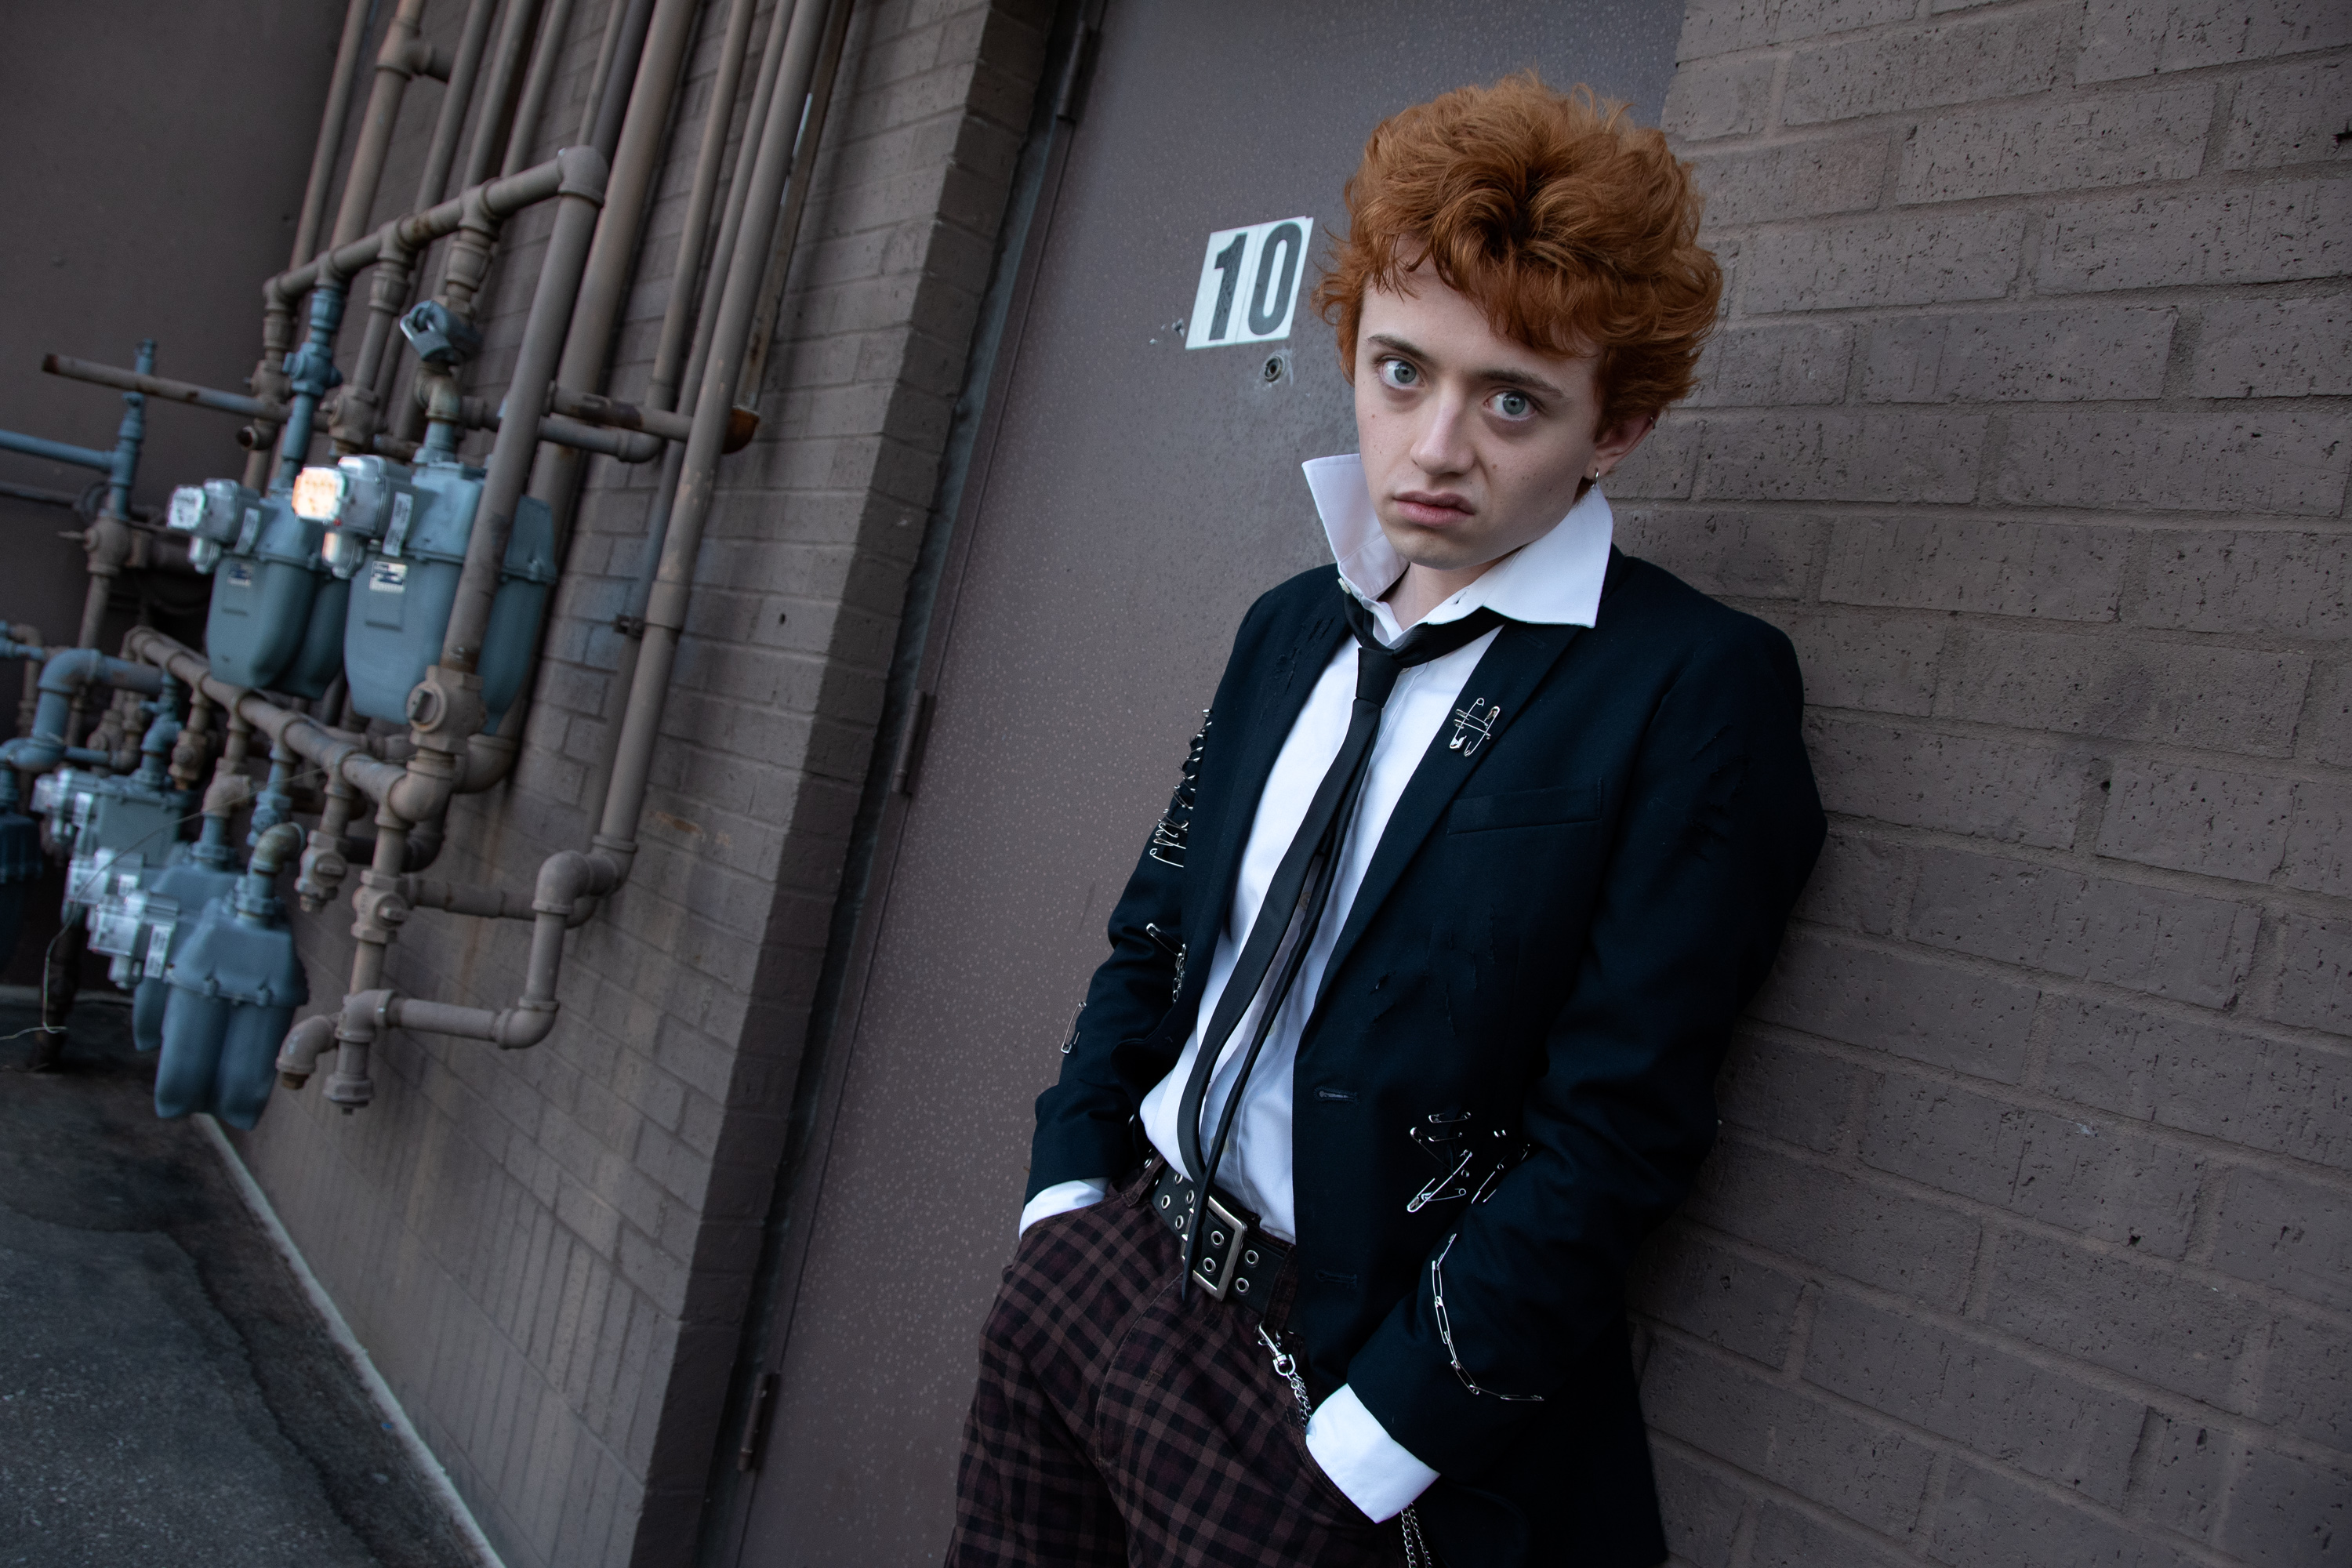 Brayden Lawrence as Johnny Rotten in Lipstick Traces. Photograph by Jason Johnson-Spinos.